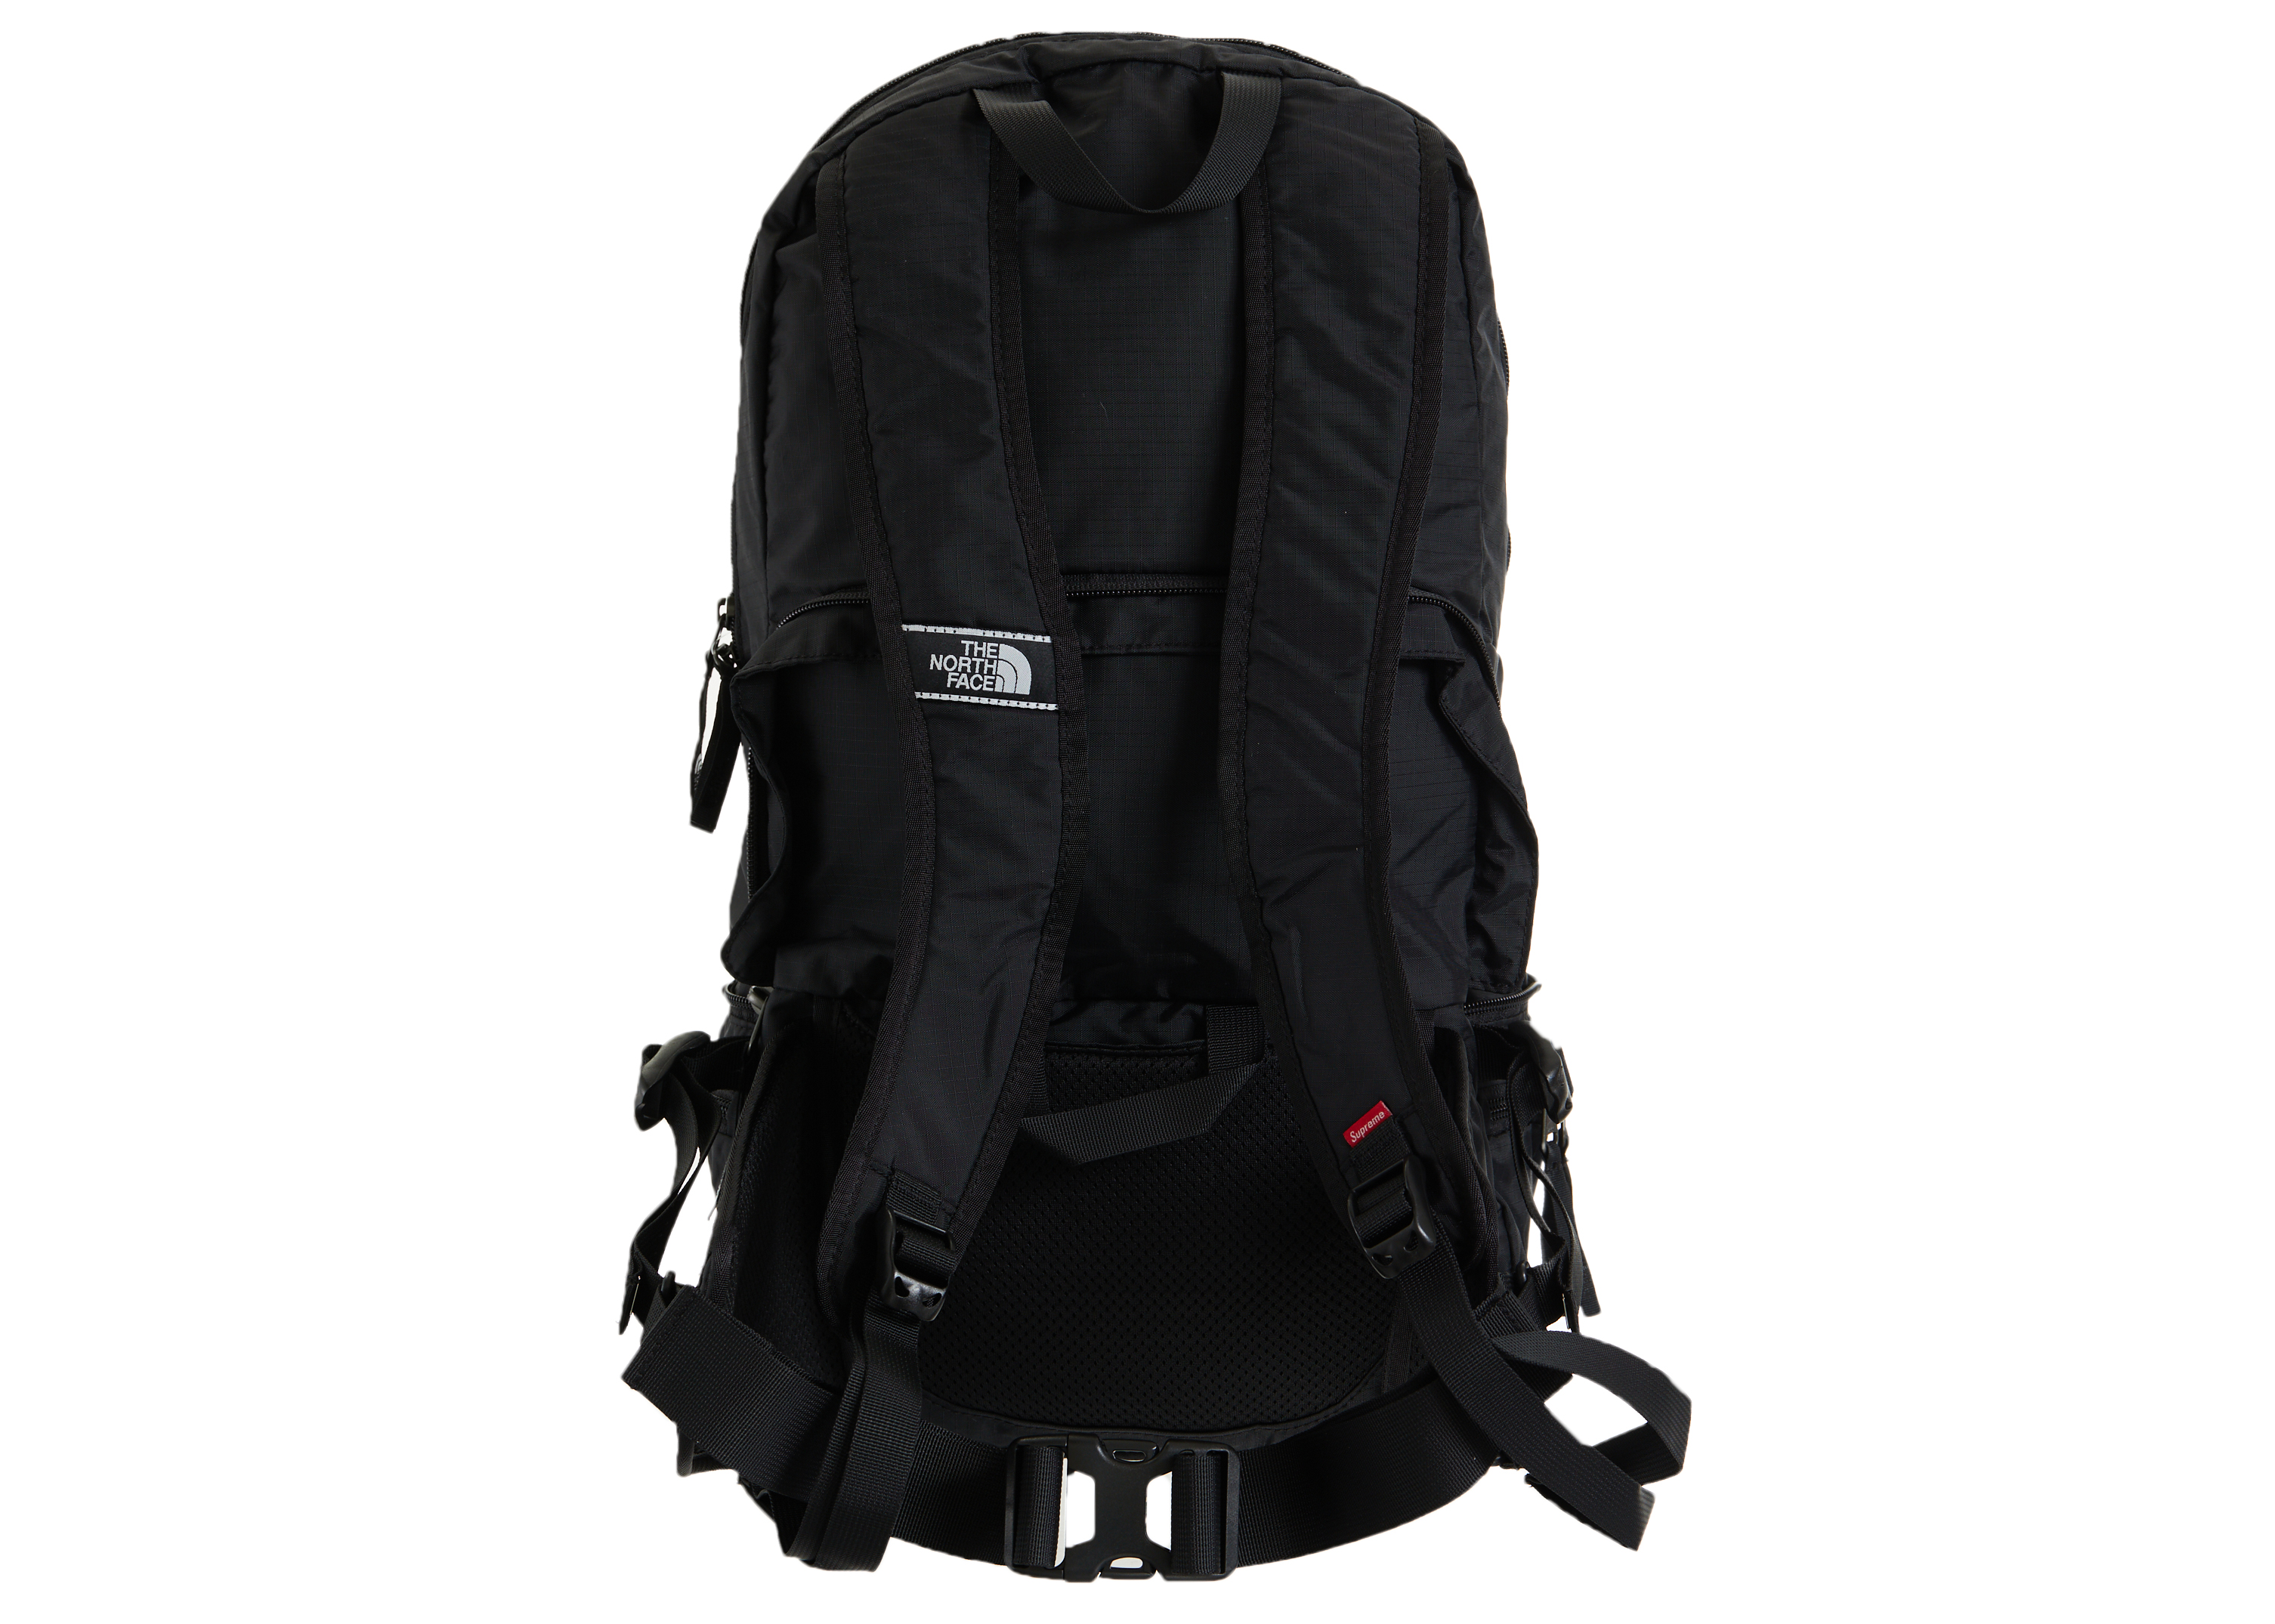 Supreme The North Face Trekking Convertible Backpack And Waist Bag 